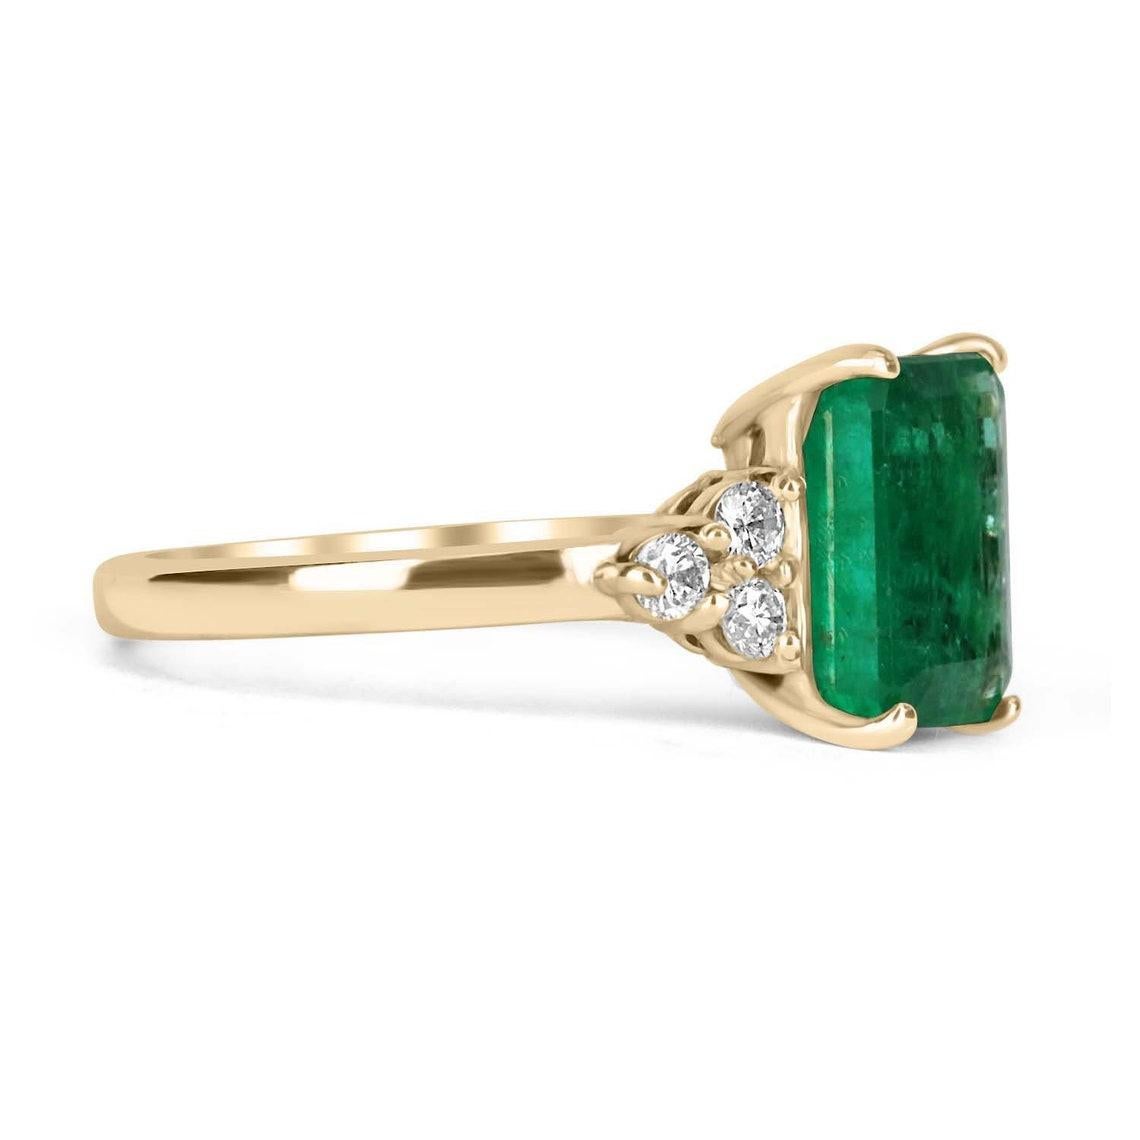 An emerald cut, emerald and diamond 14K ring. Dexterously handcrafted in gleaming solid 14K yellow gold, this ring features a natural emerald, set in a secure four-prong setting. This extraordinary emerald has stunning green color, strong